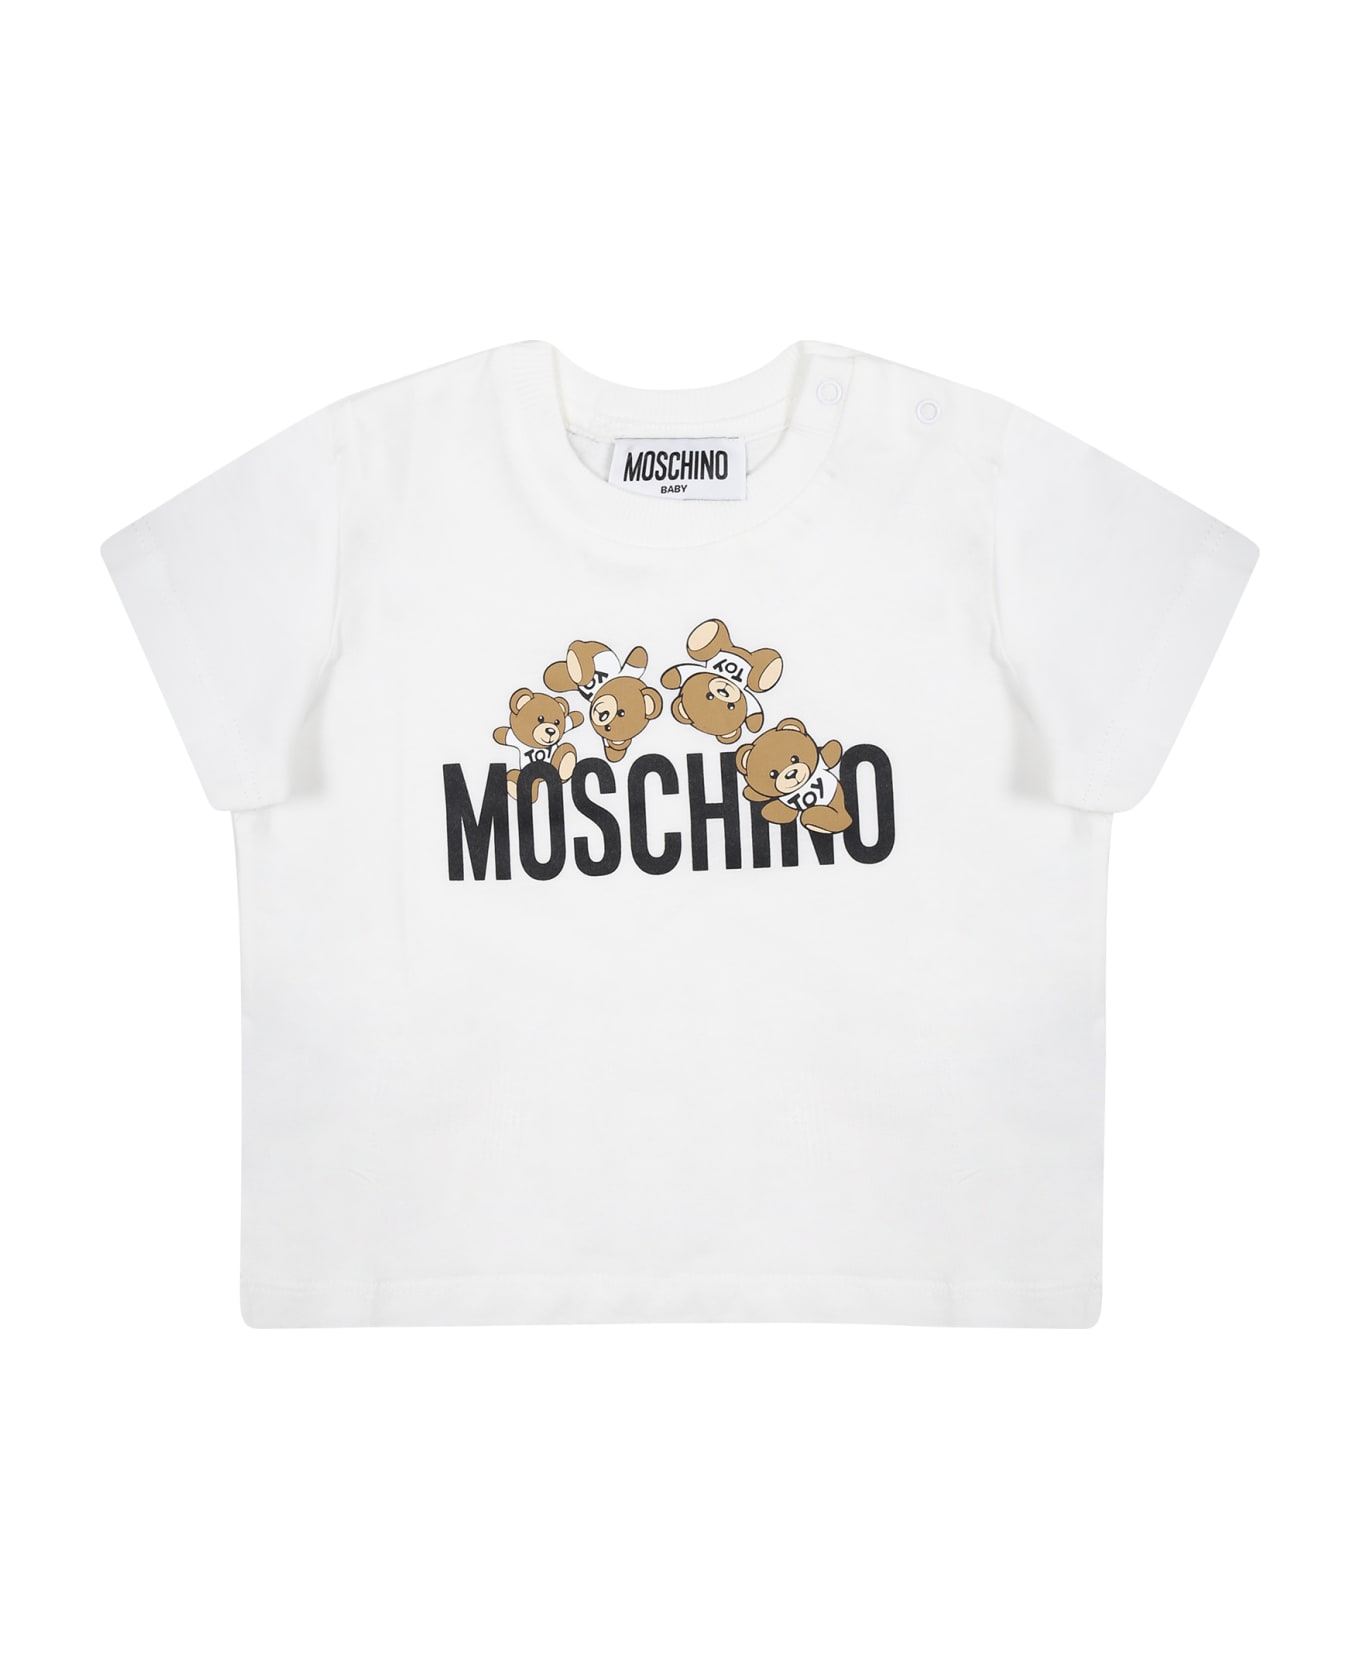 Moschino White T-shirt For Baby Boy With Teddy Bears And Logo - White